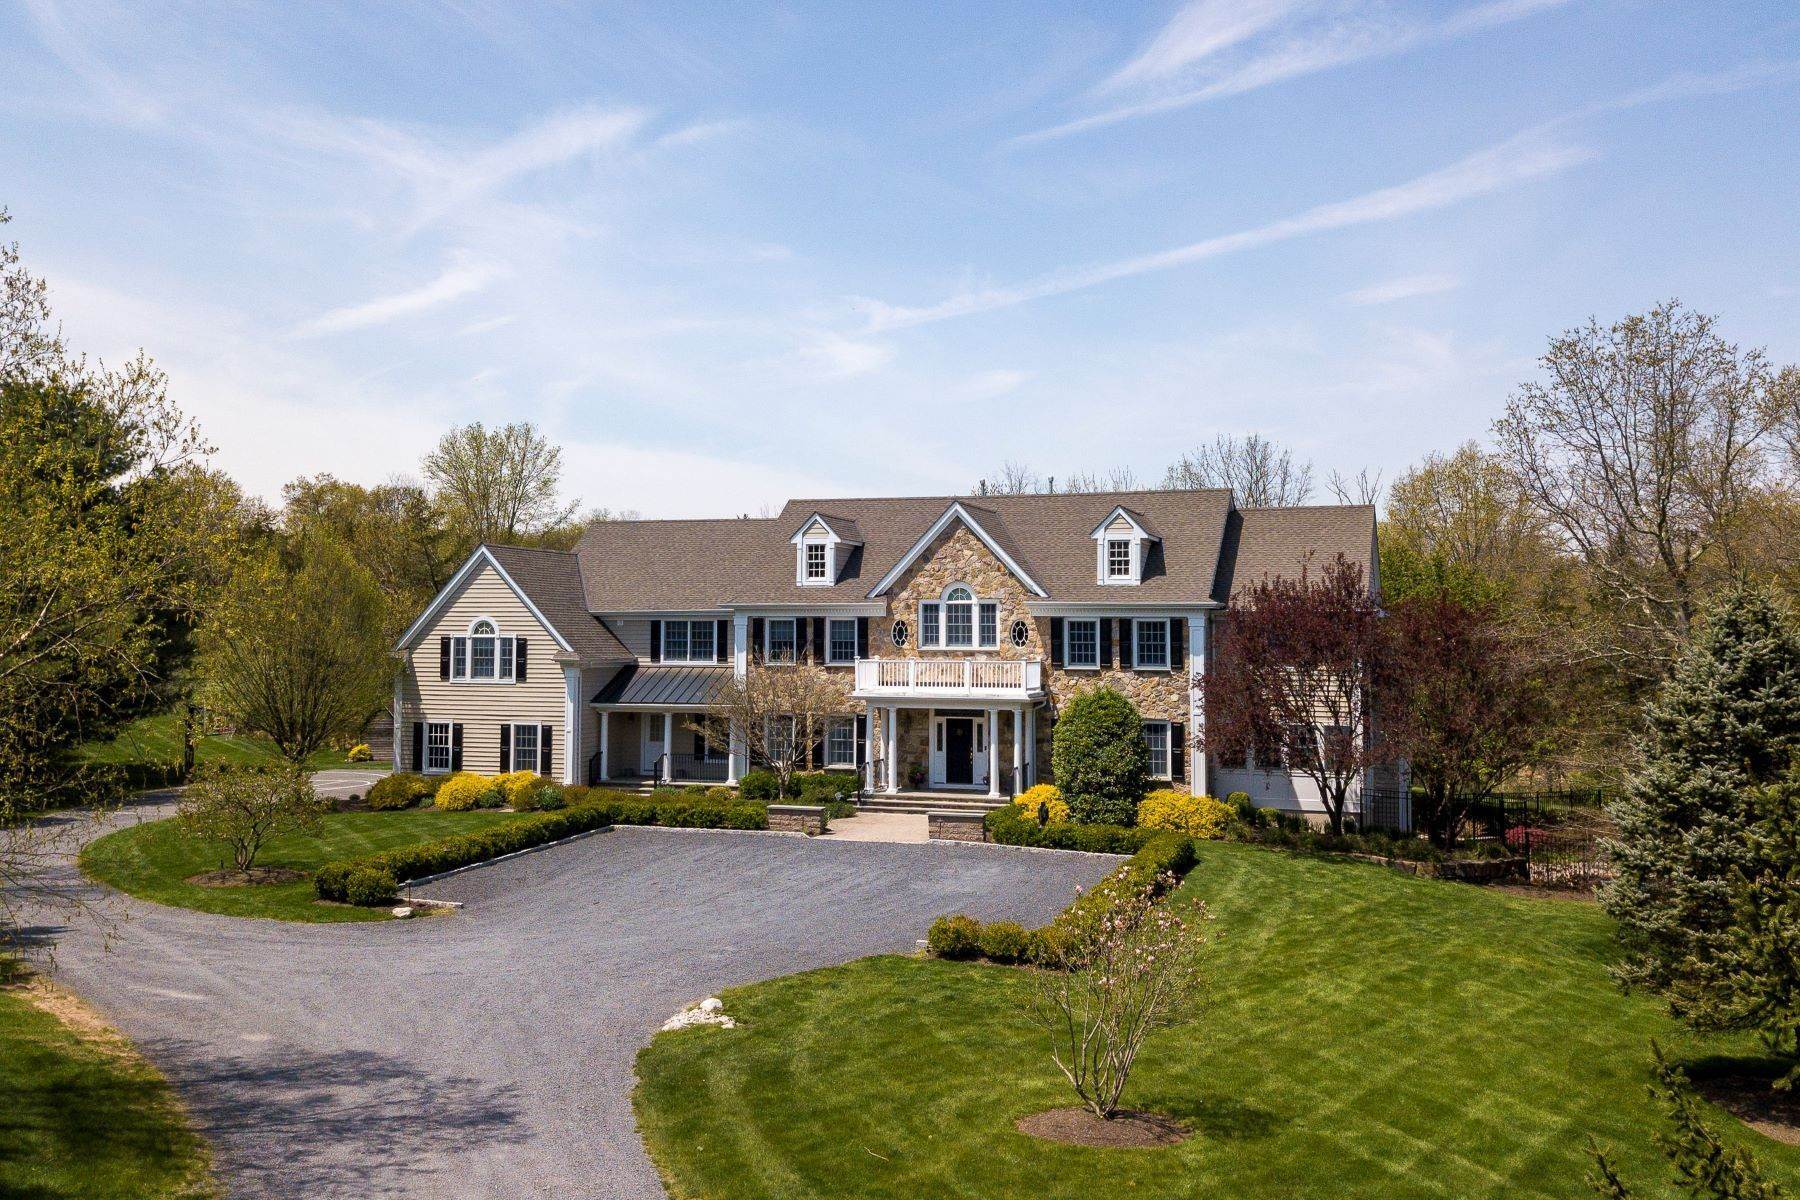 Property for Sale at Space, Warmth and Style with the Perfect Setting 57 Elm Ridge Road, Pennington, New Jersey 08534 United States